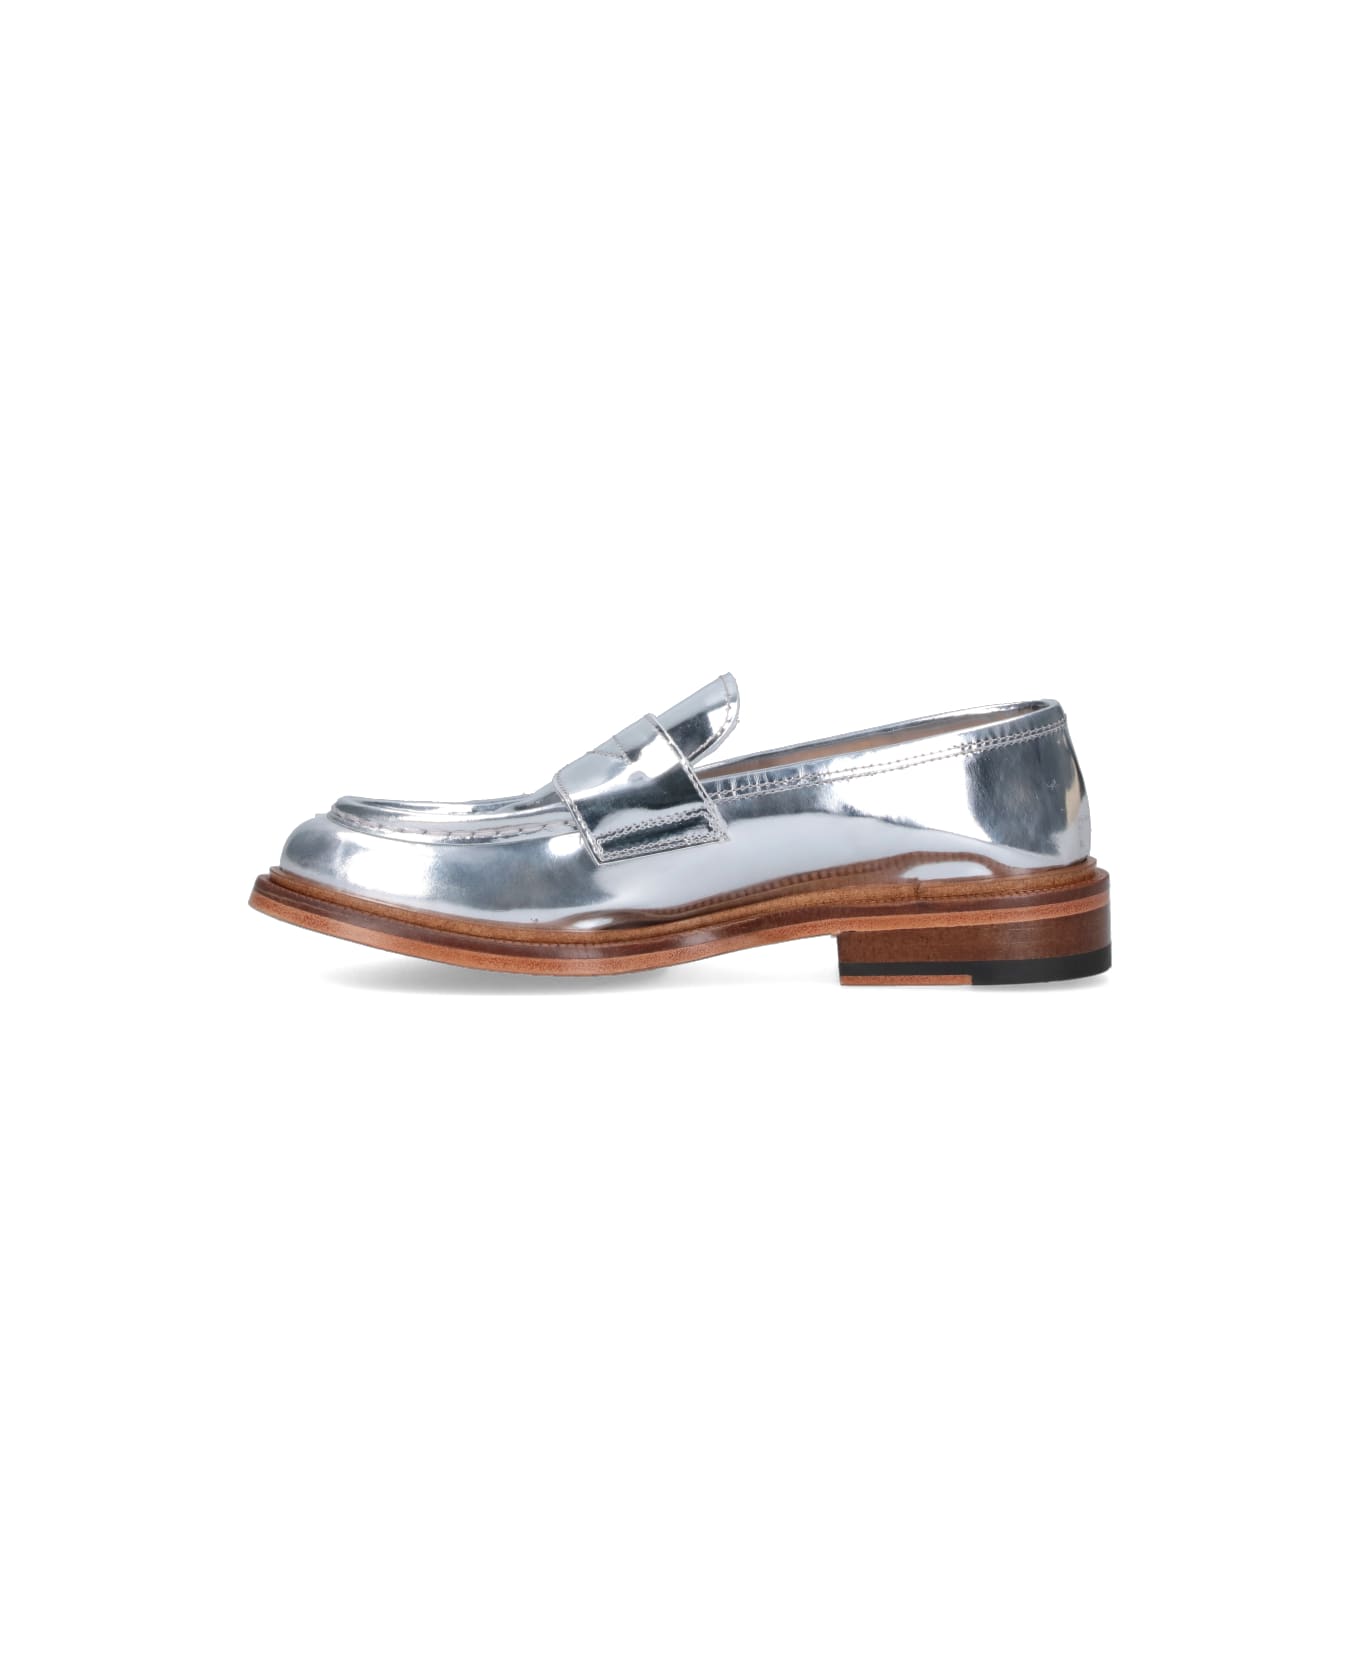 Alexander Hotto Classic Loafers - Silver